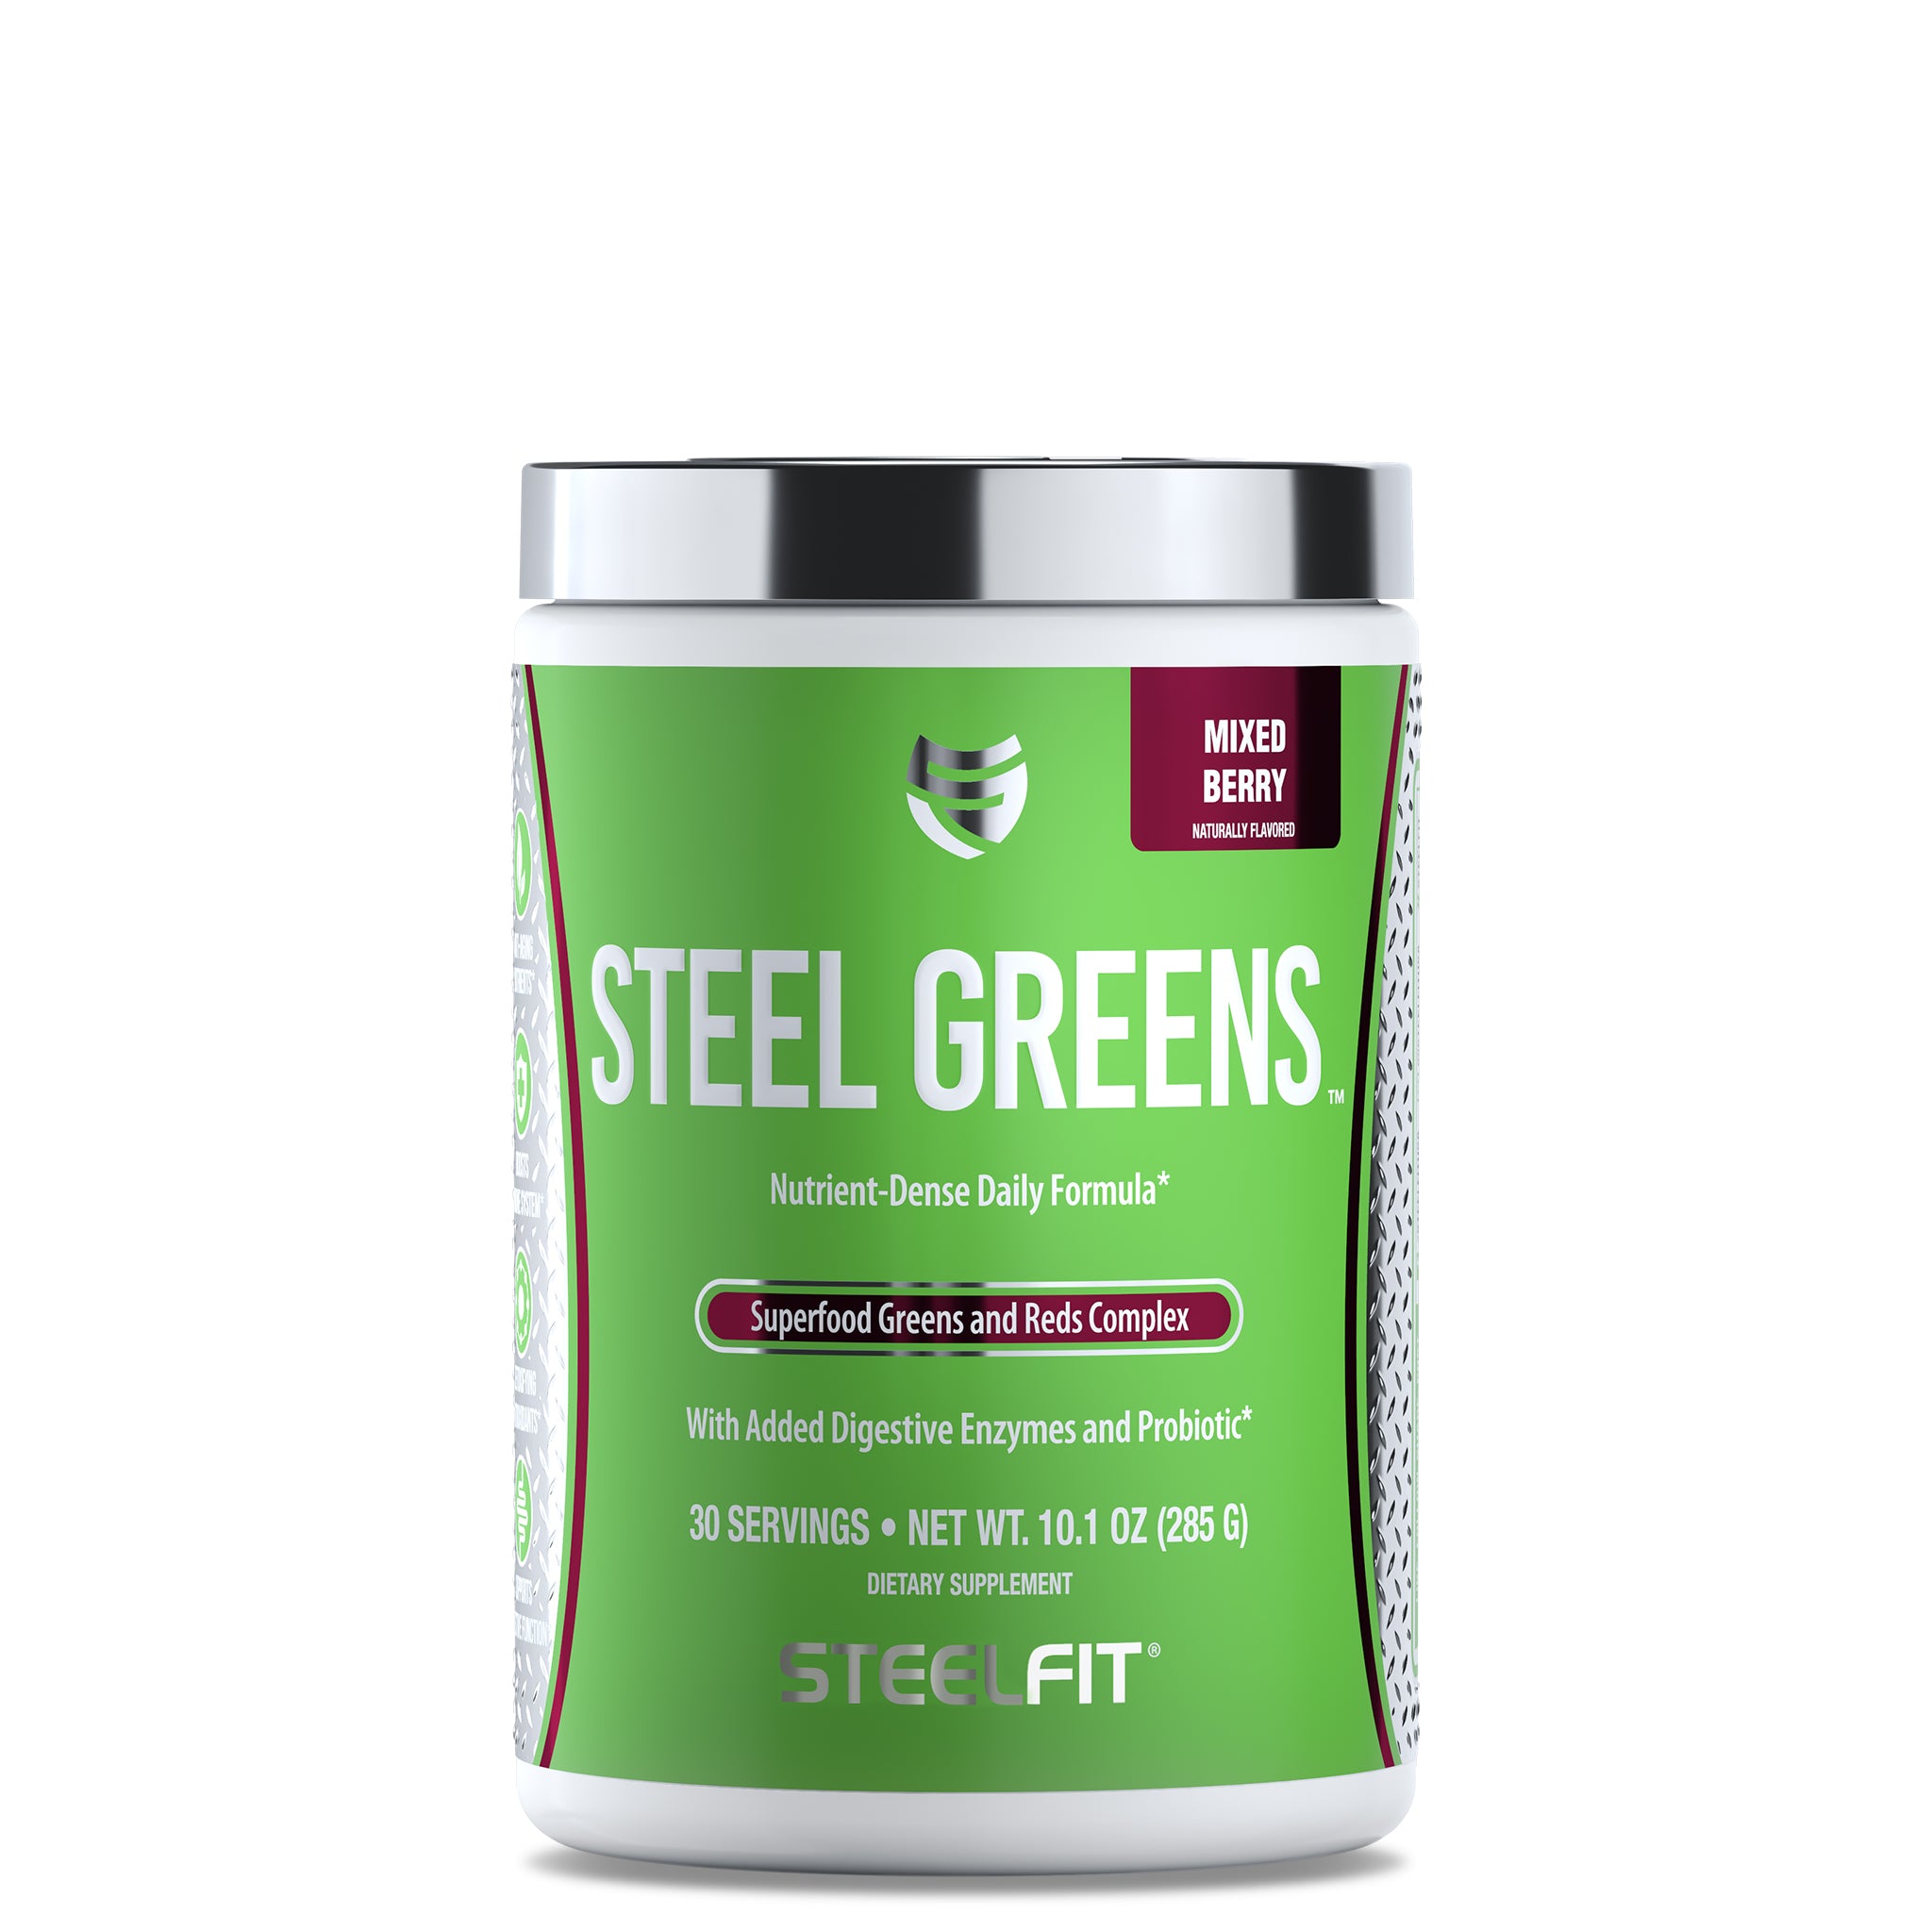 green superfood supplement, green superfood supplements, green superfood powder